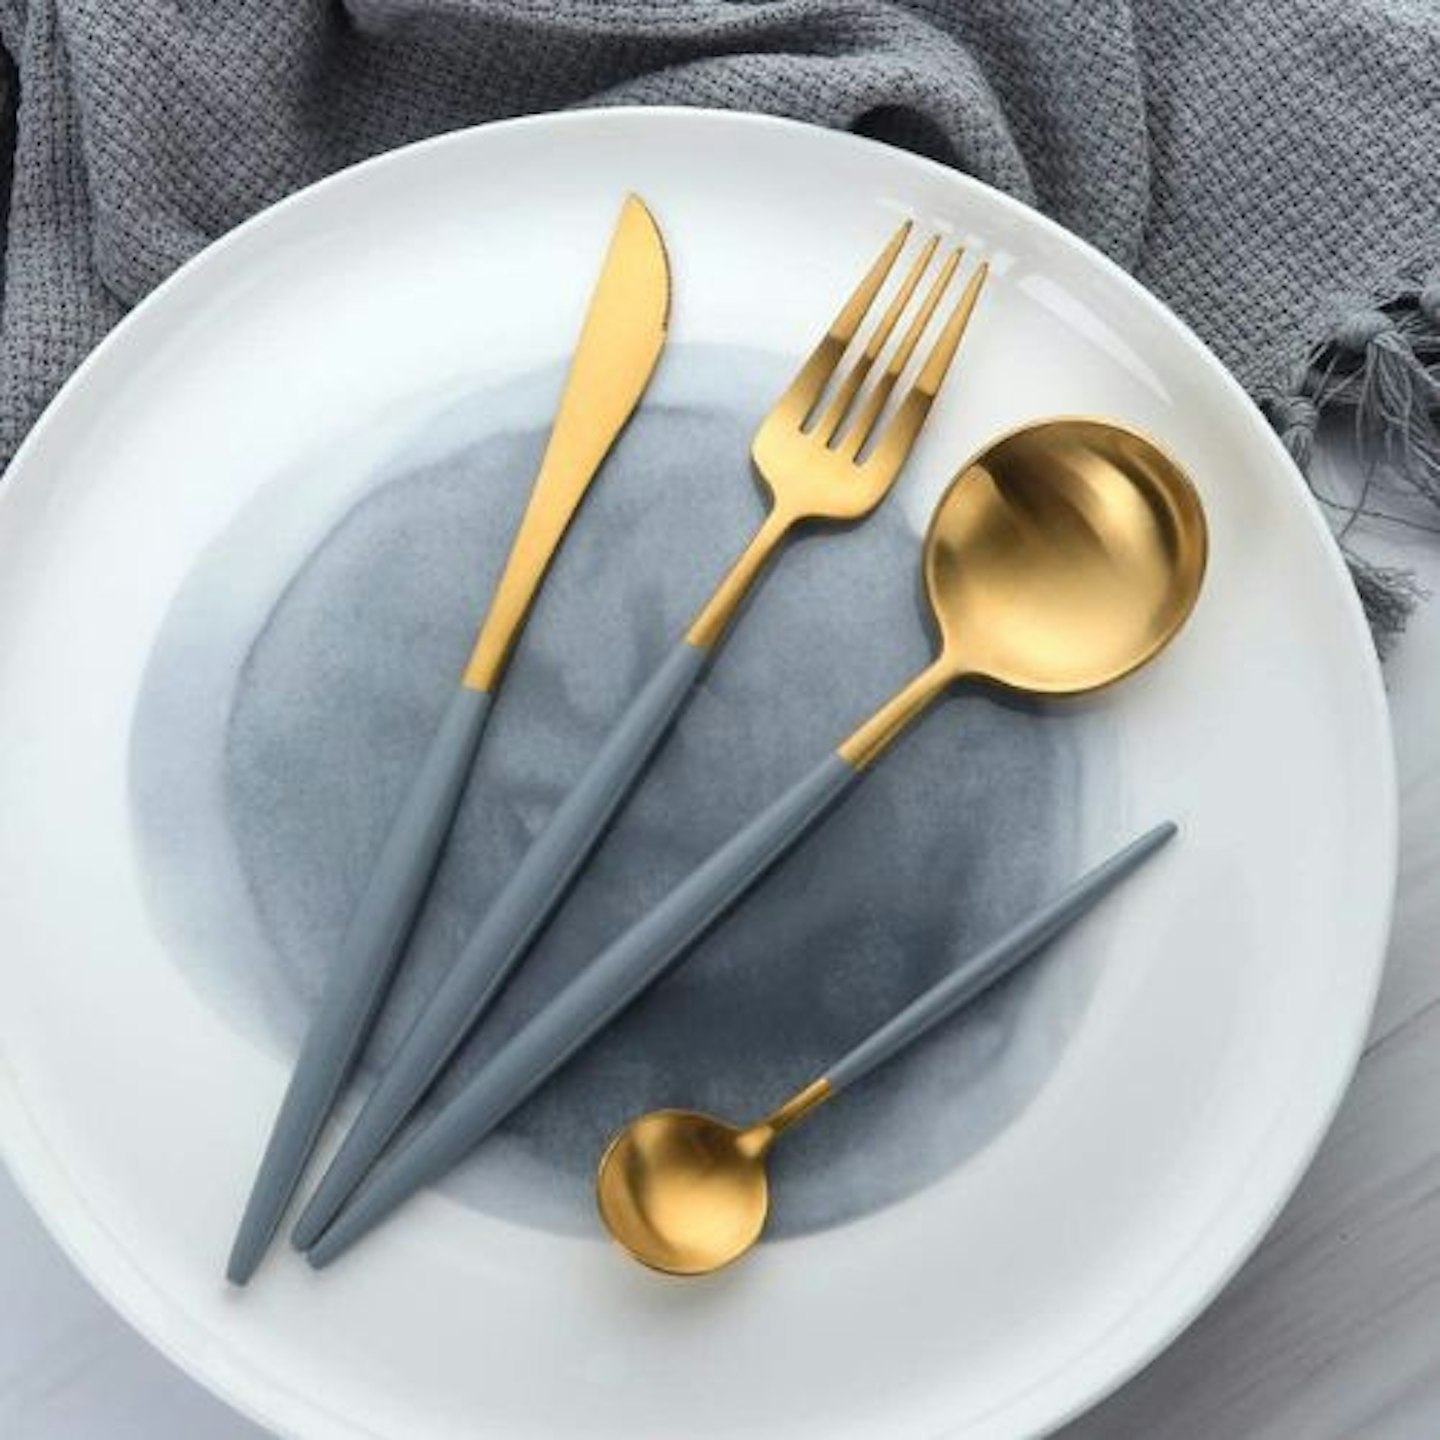 Buyer Star 4 Piece Luxury Gold Cutlery Set with Gray Handle